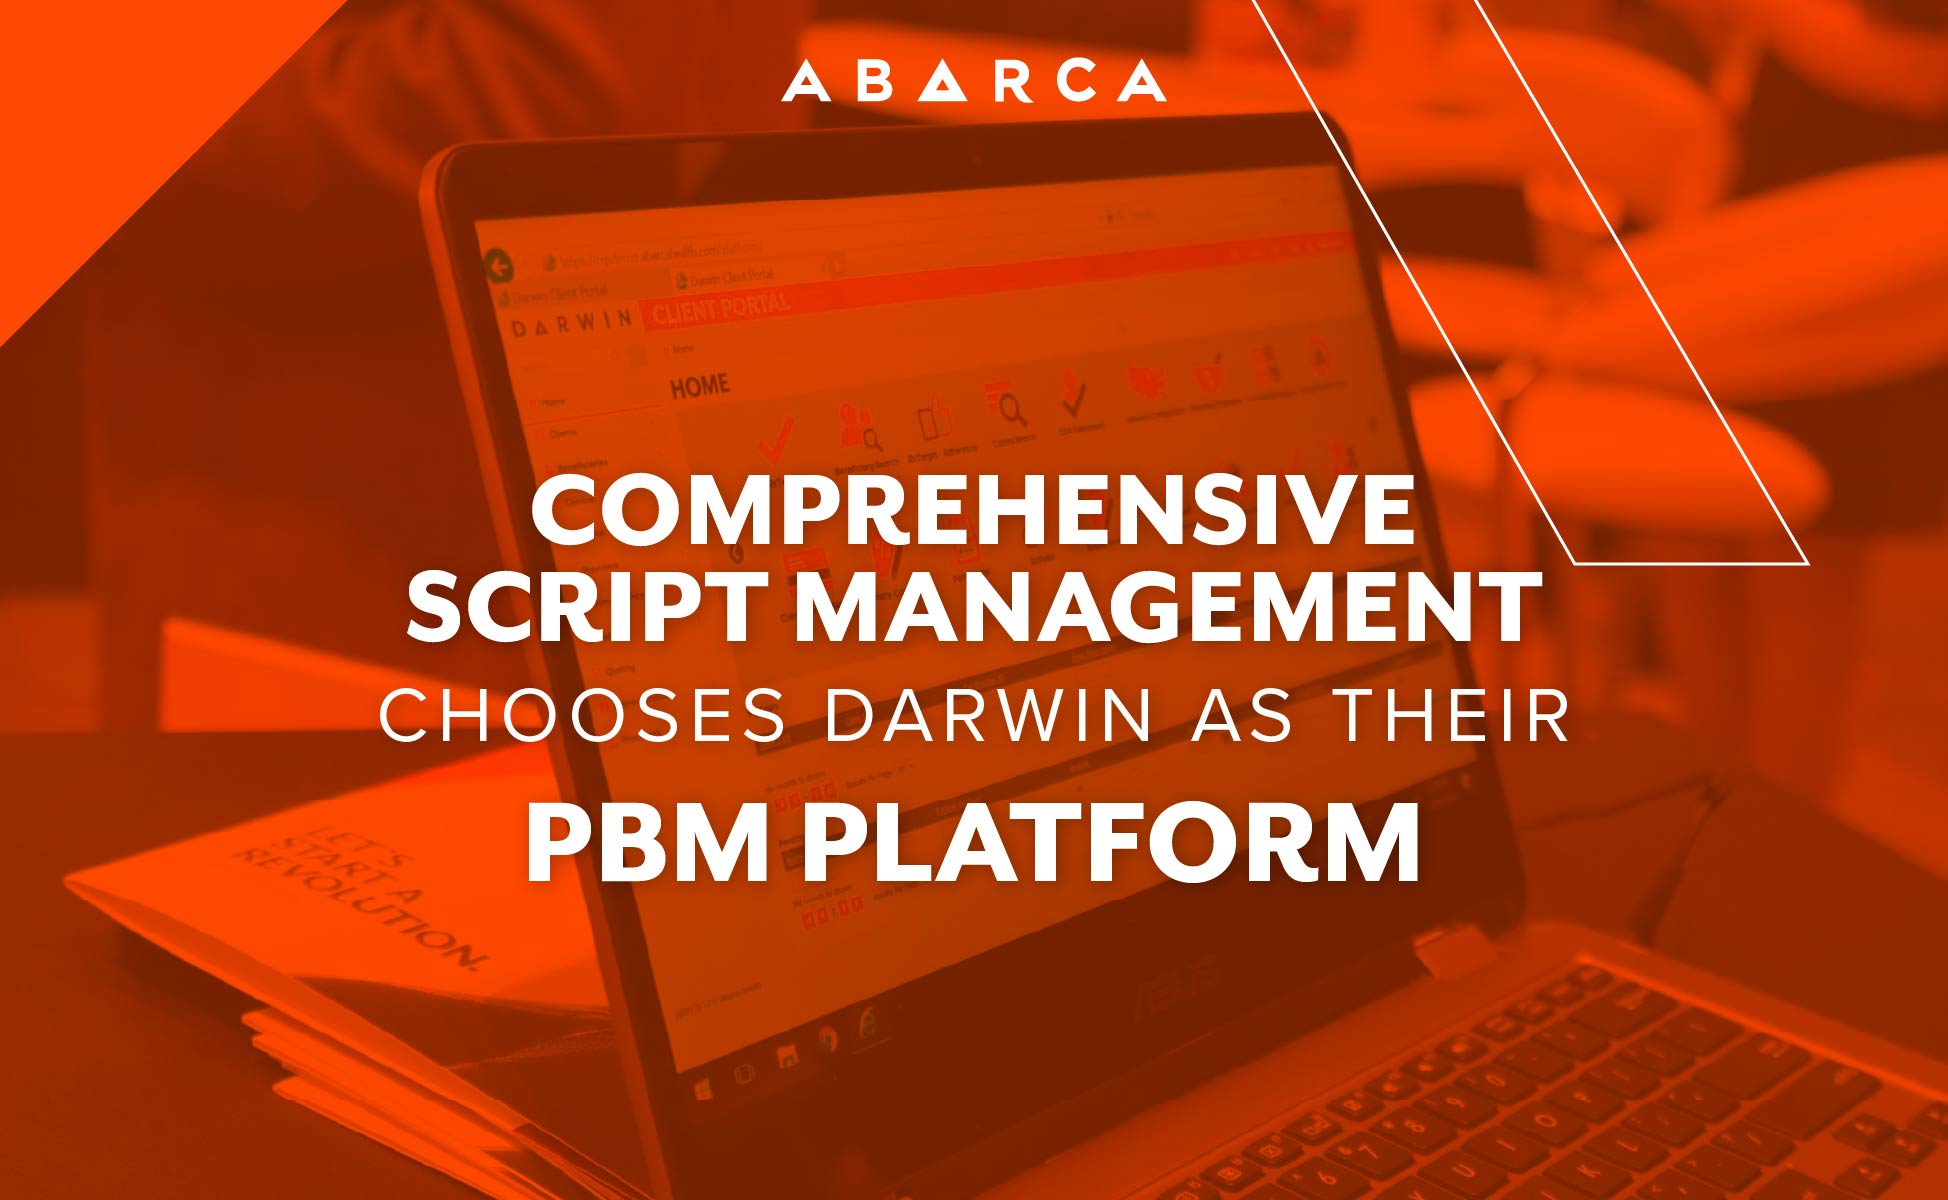 Comprehensive Script Management Chooses Abarca’s Smarter PBM Platform for Better Operations, Analytics, and Member Experience